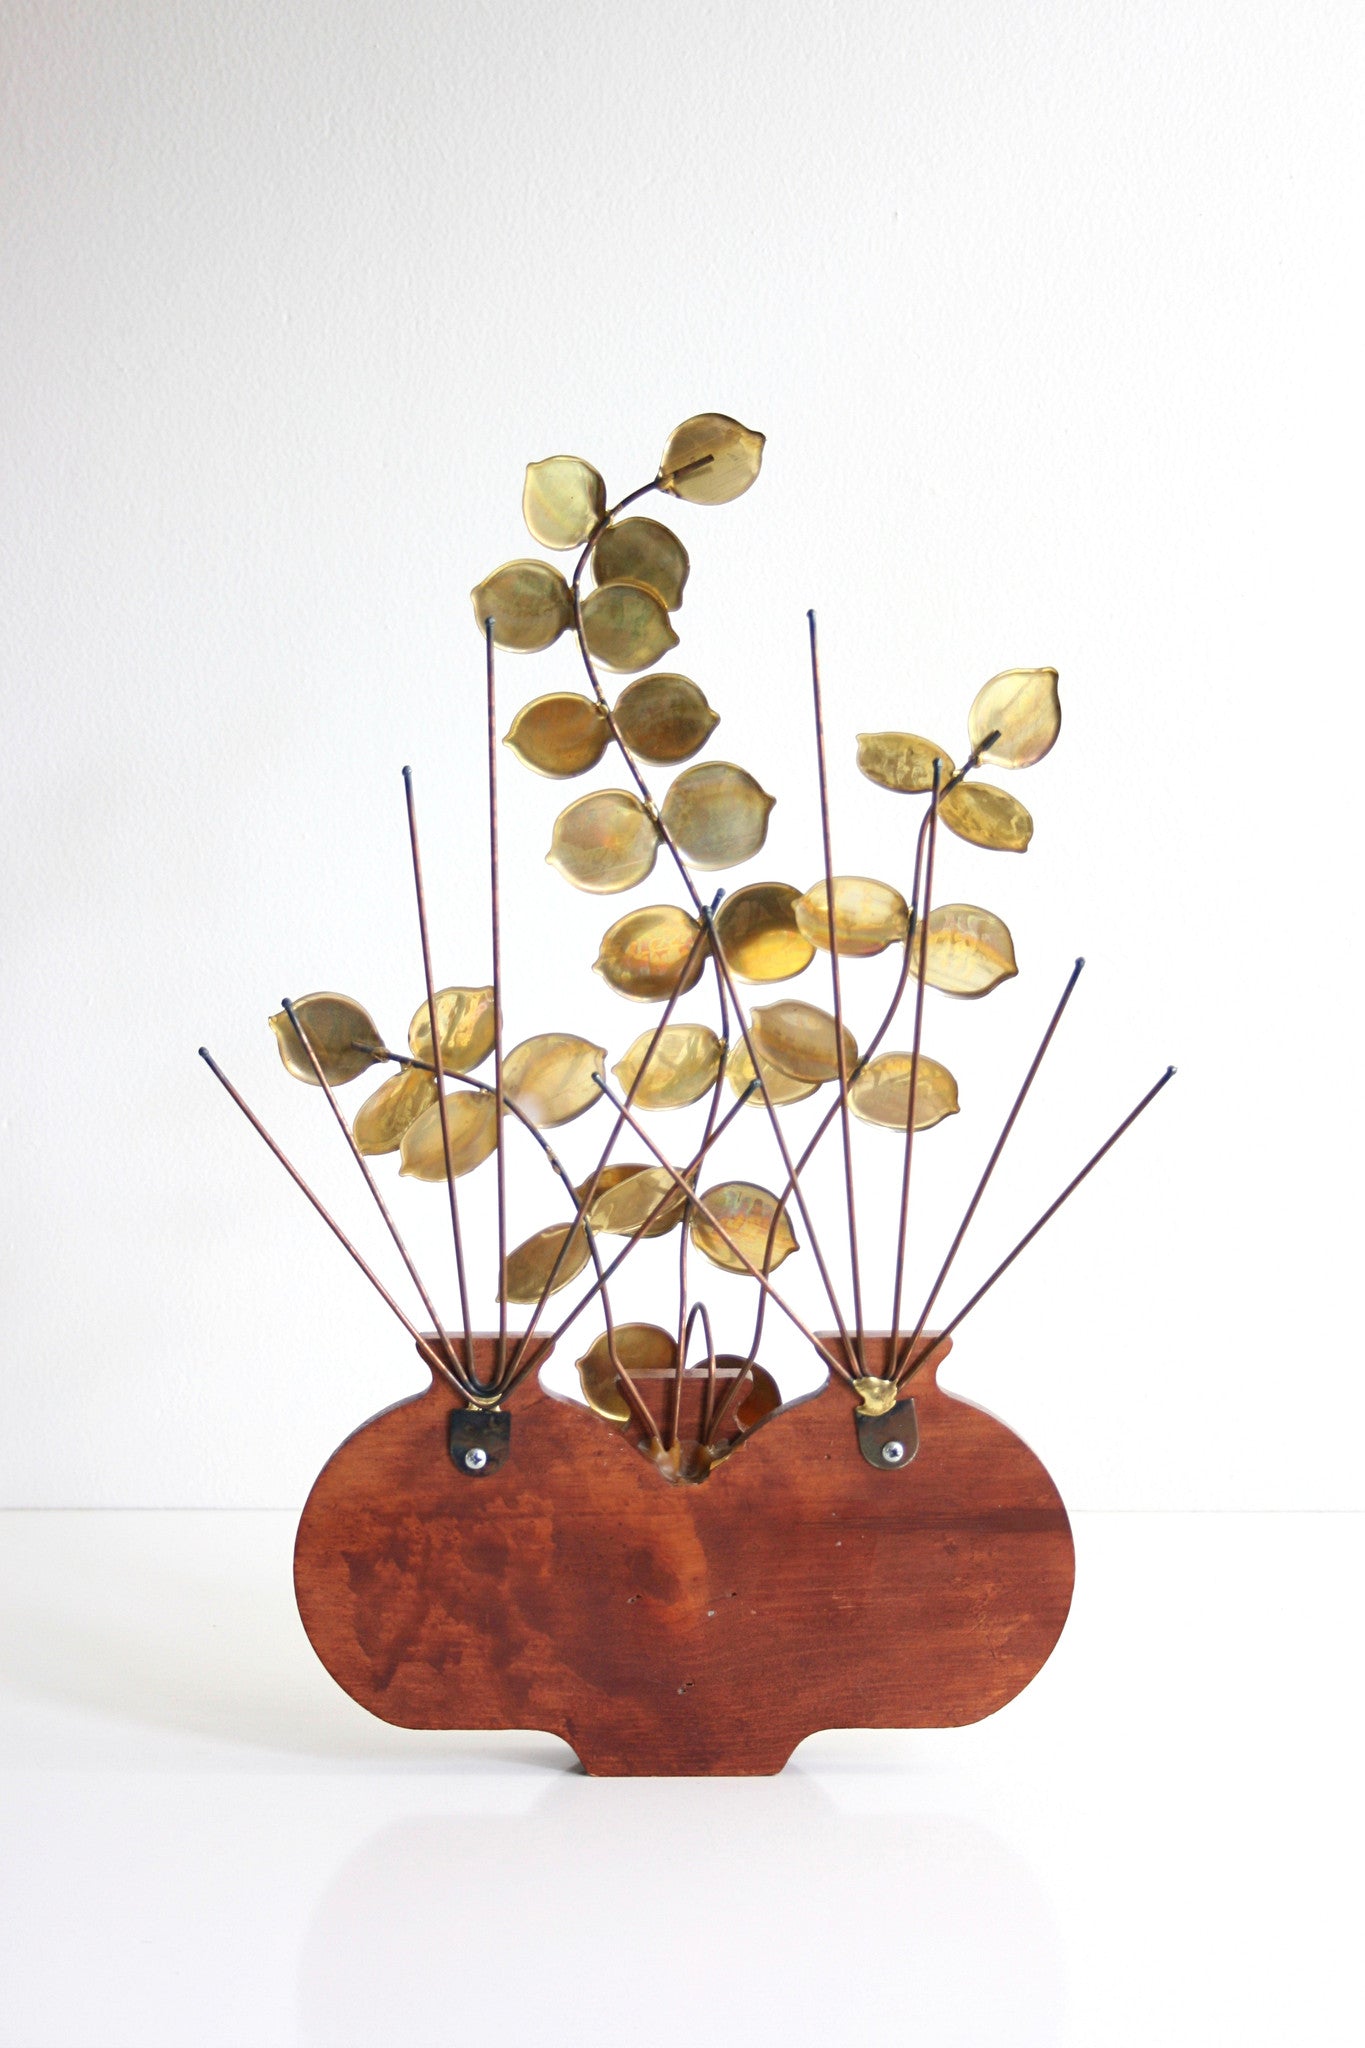 SOLD - Mid Century Modern Wood and Brass Plant Wall Hanging / Vintage Brass Plant Sculpture